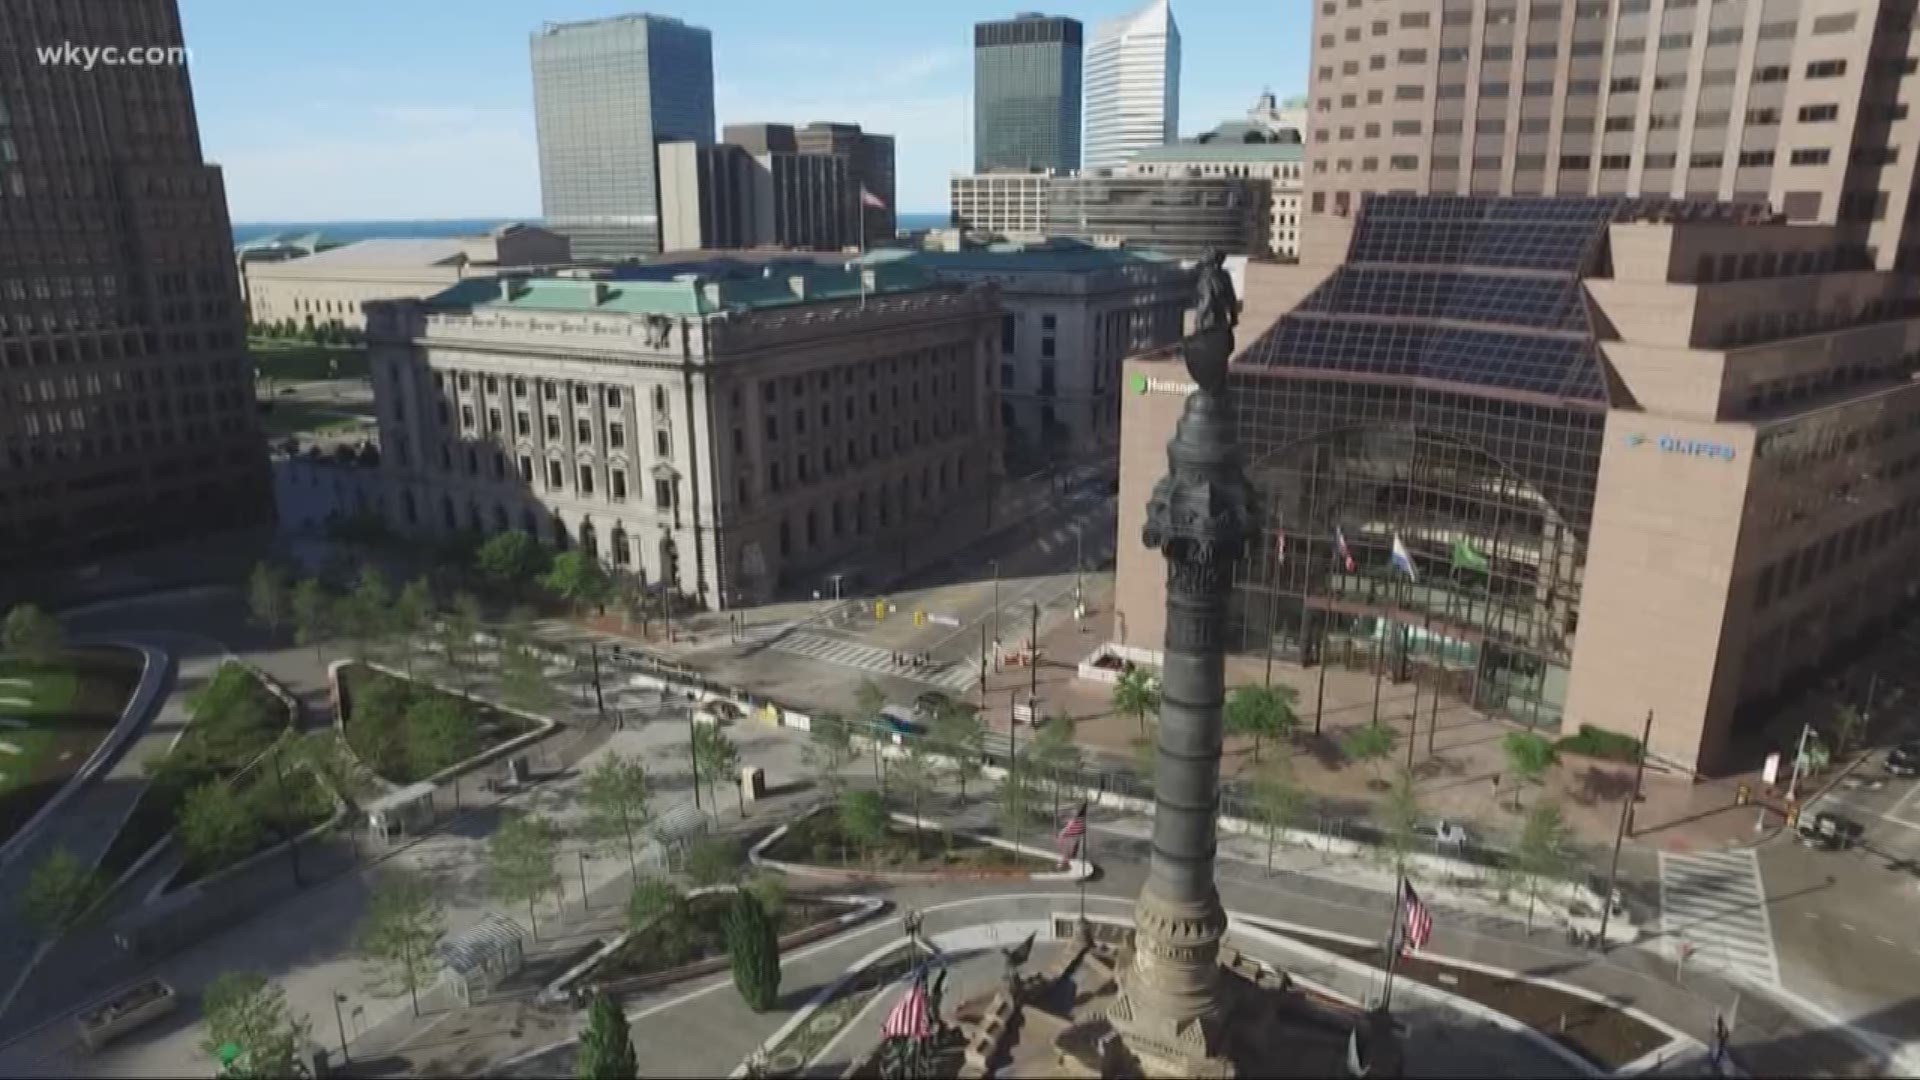 Sept. 25, 2018: Cleveland has done it again! Public Square has been recognized by the American Planning Association as one of five Great Public Spaces in the country.